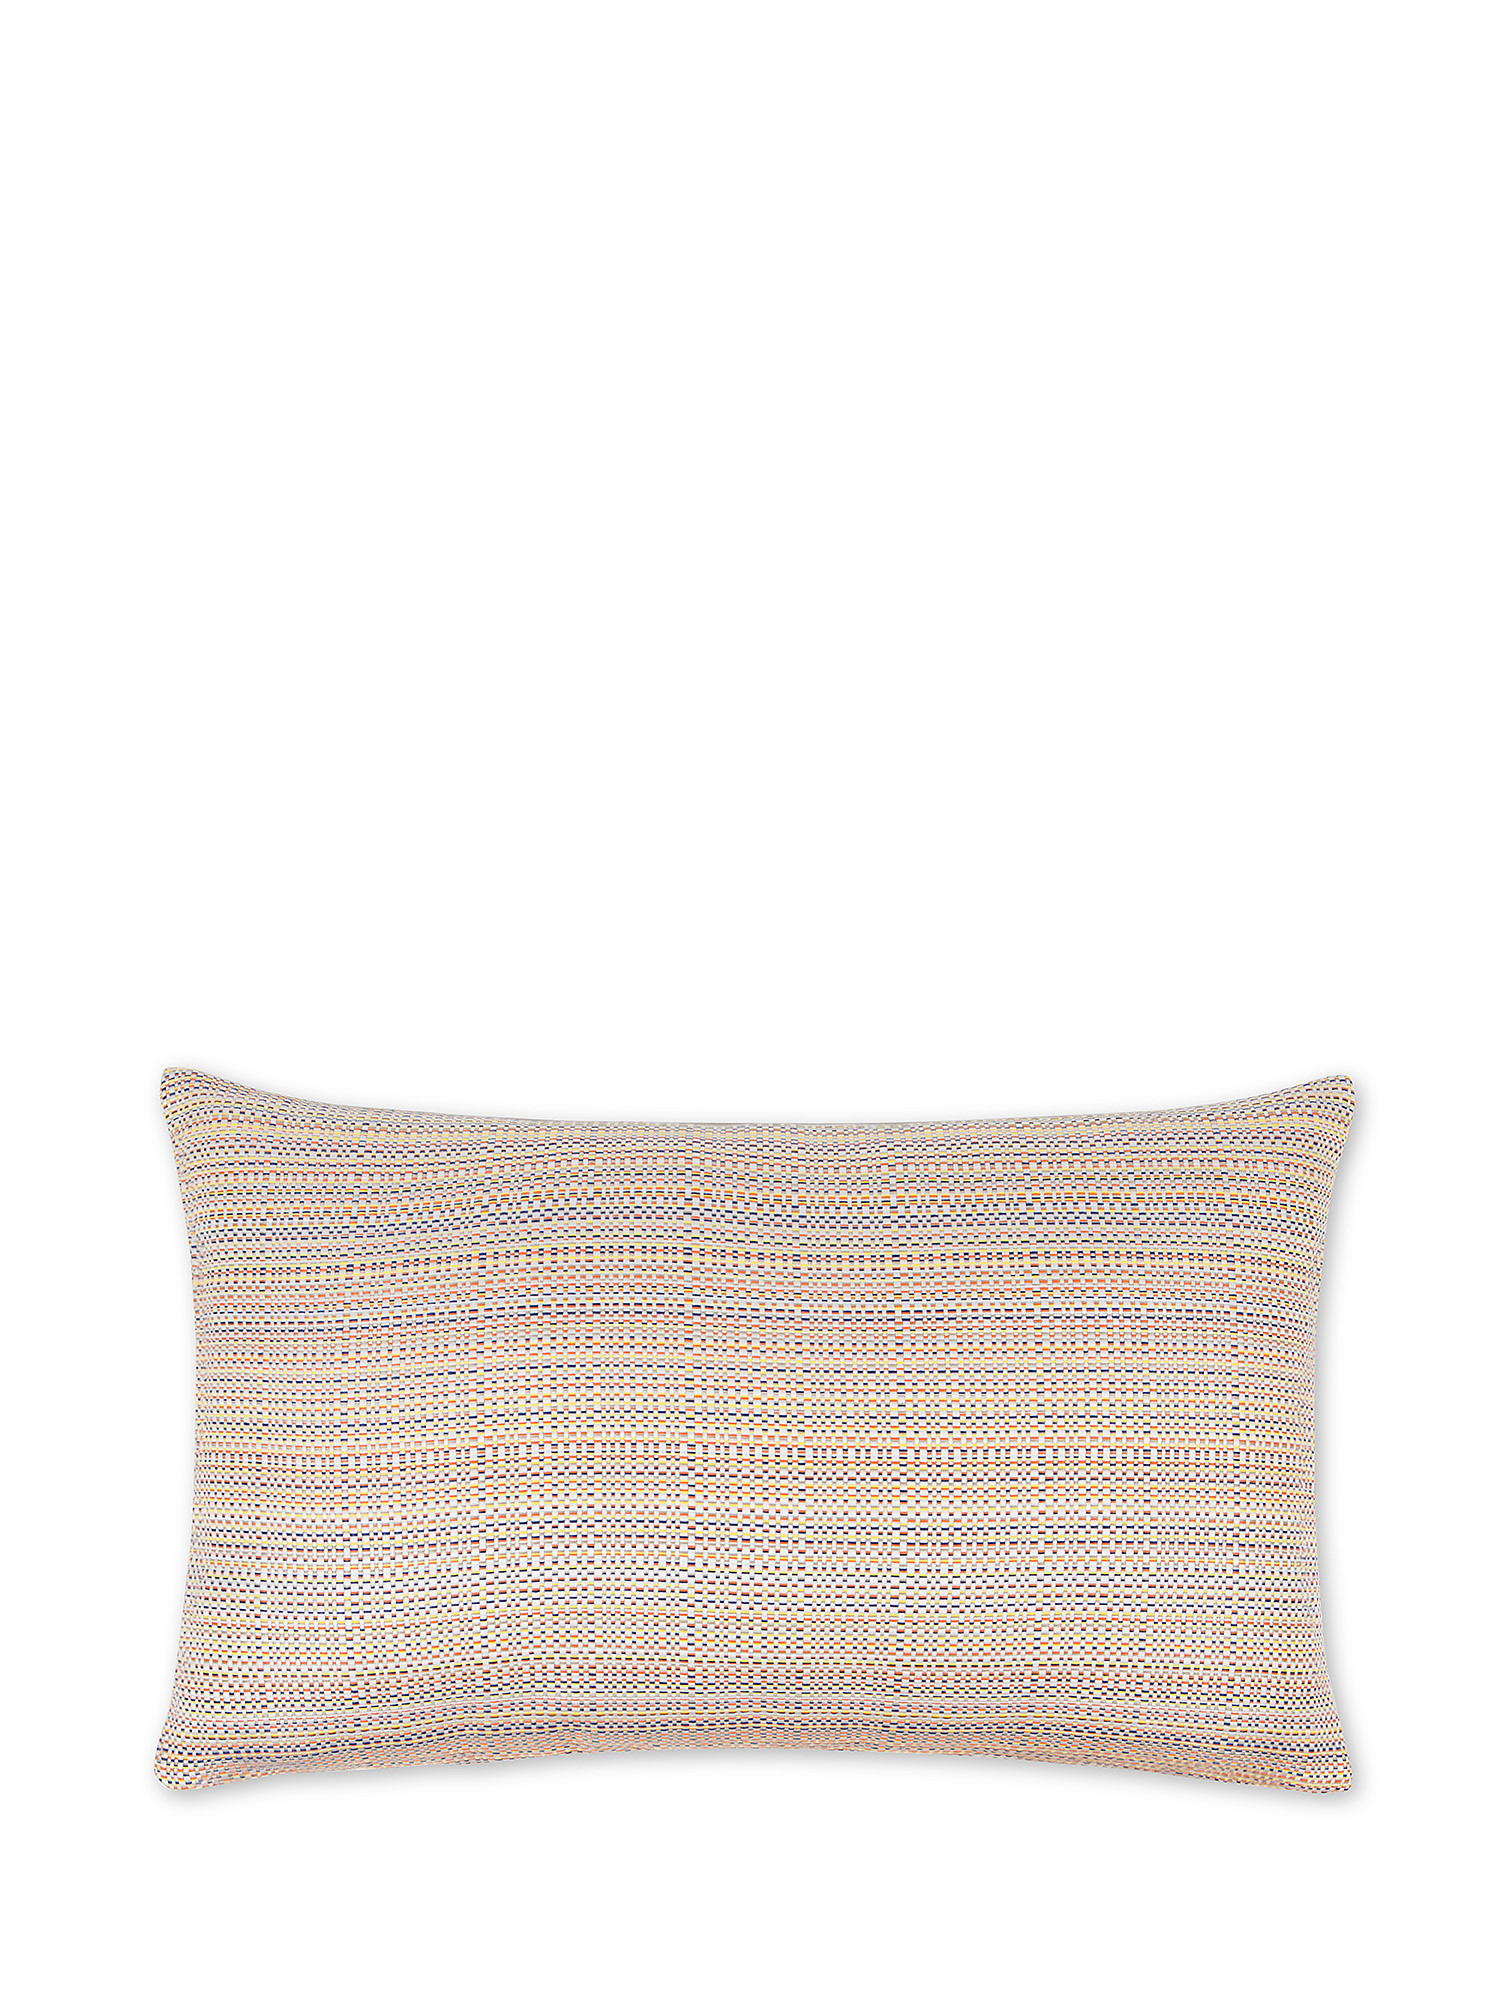 35x55 cm outdoor cushion with striped pattern, with zip and padding., Multicolor, large image number 0